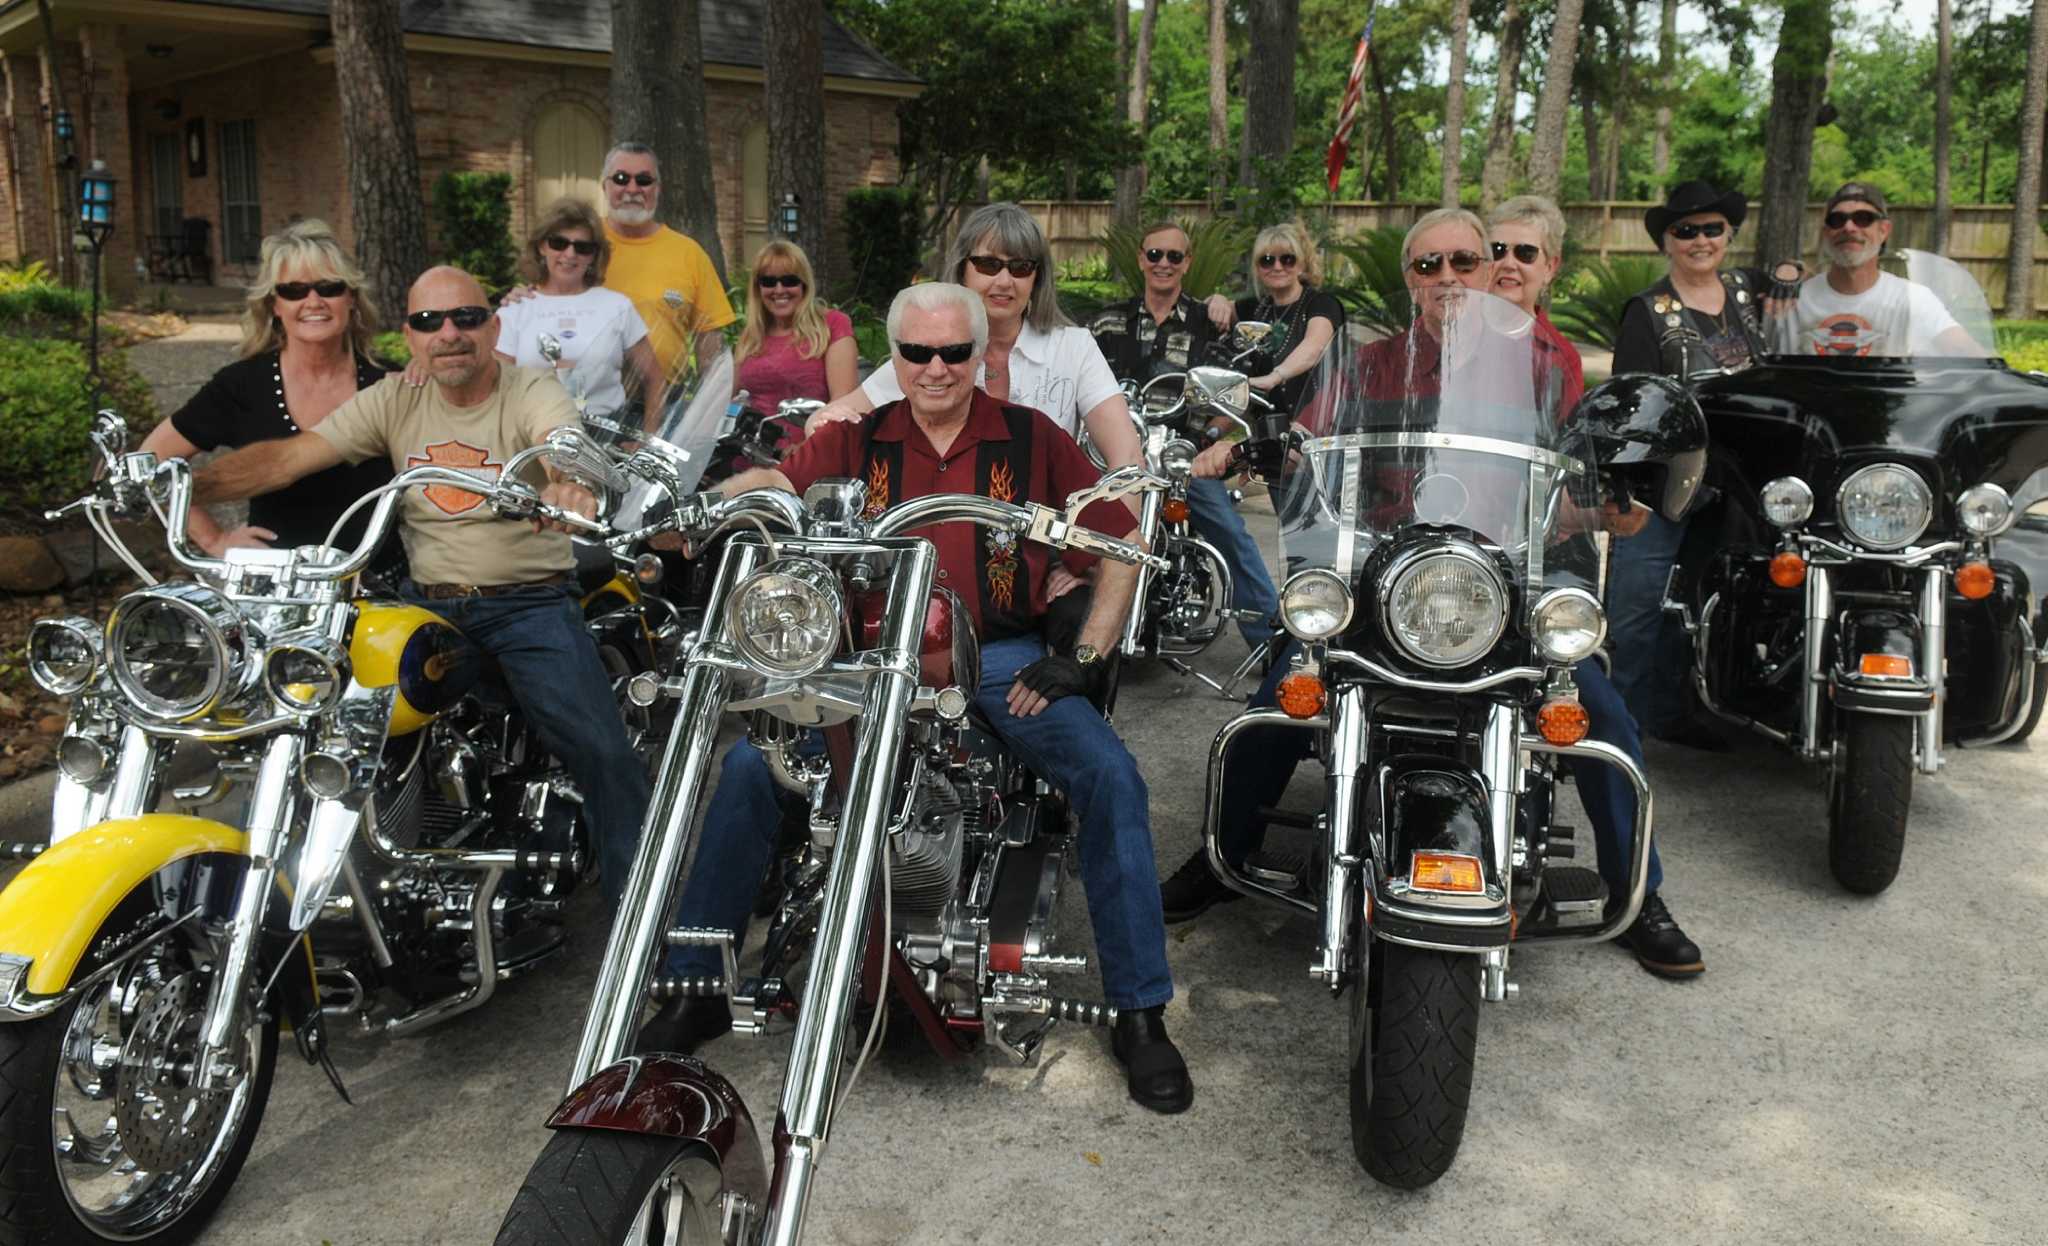 Harley Club Continues A 20 Year Tradition In Kingwood